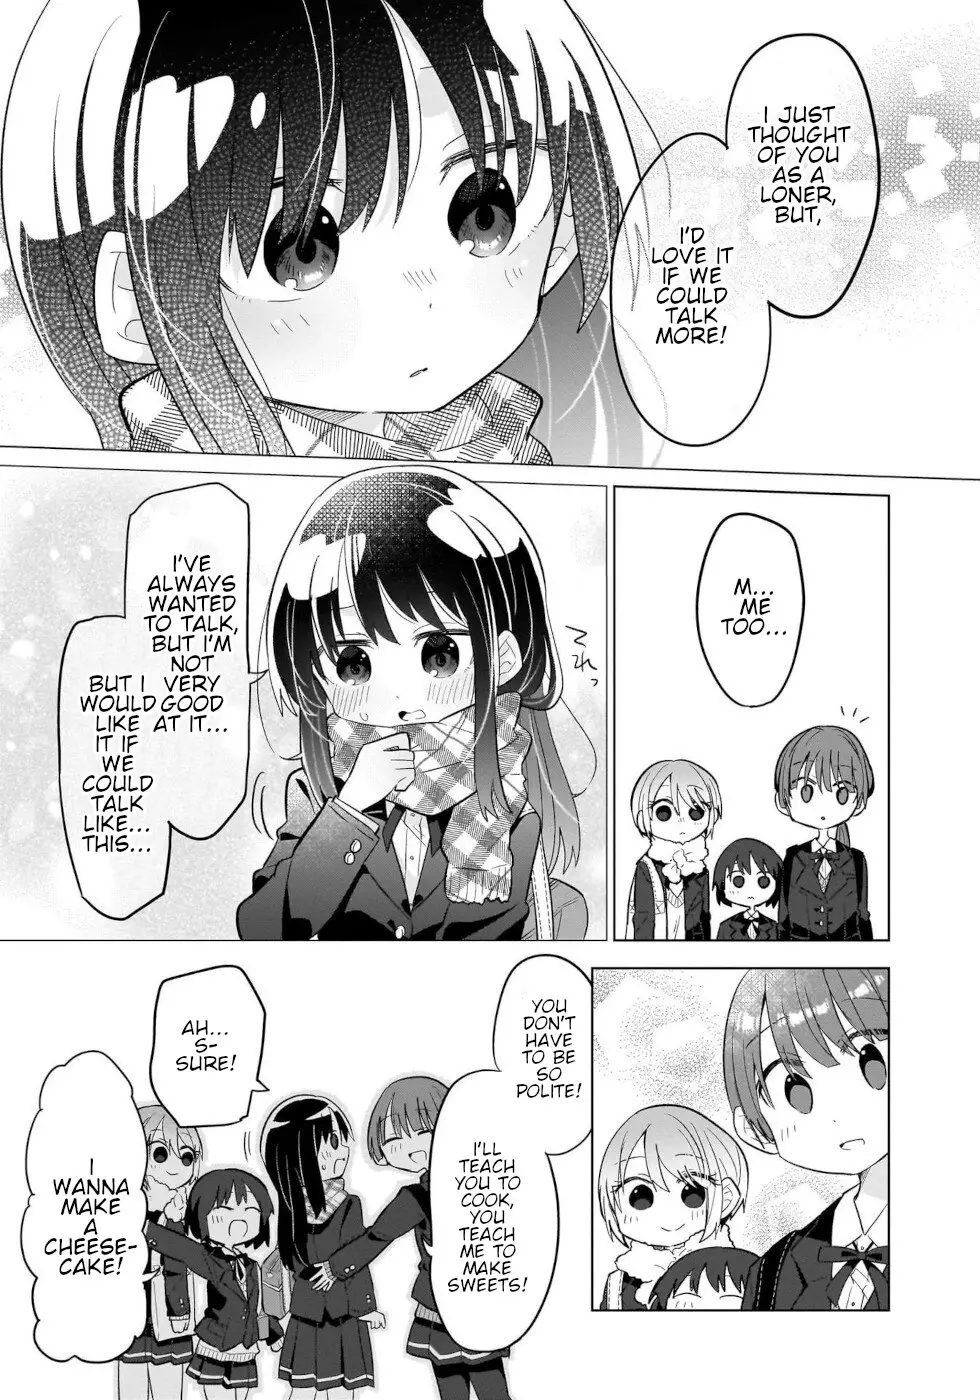 Sweets, Elf, And A High School Girl - 7 page 19-b1476aba